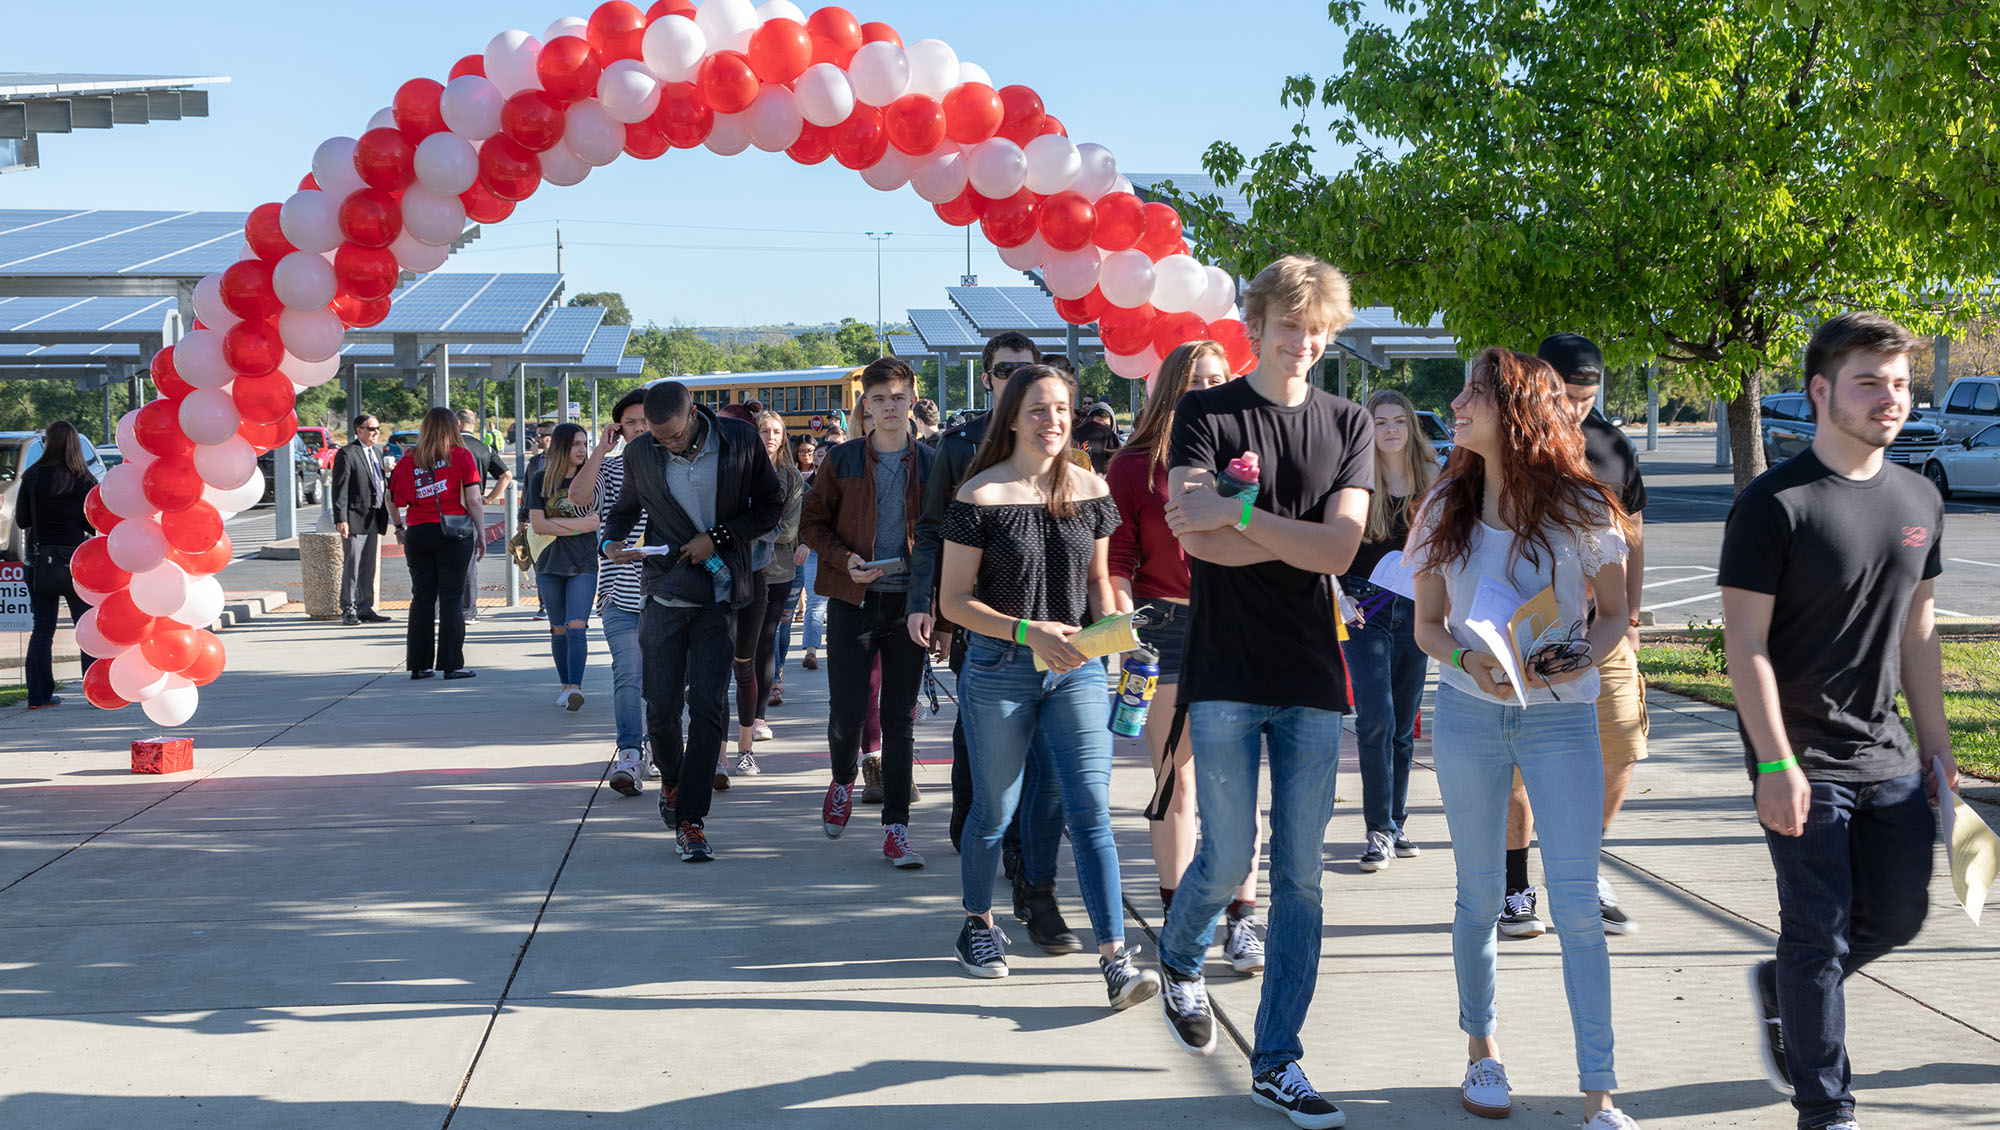 Sierra College Promise Program kickoff celebration with a procession of students walking underneath a balloon arch